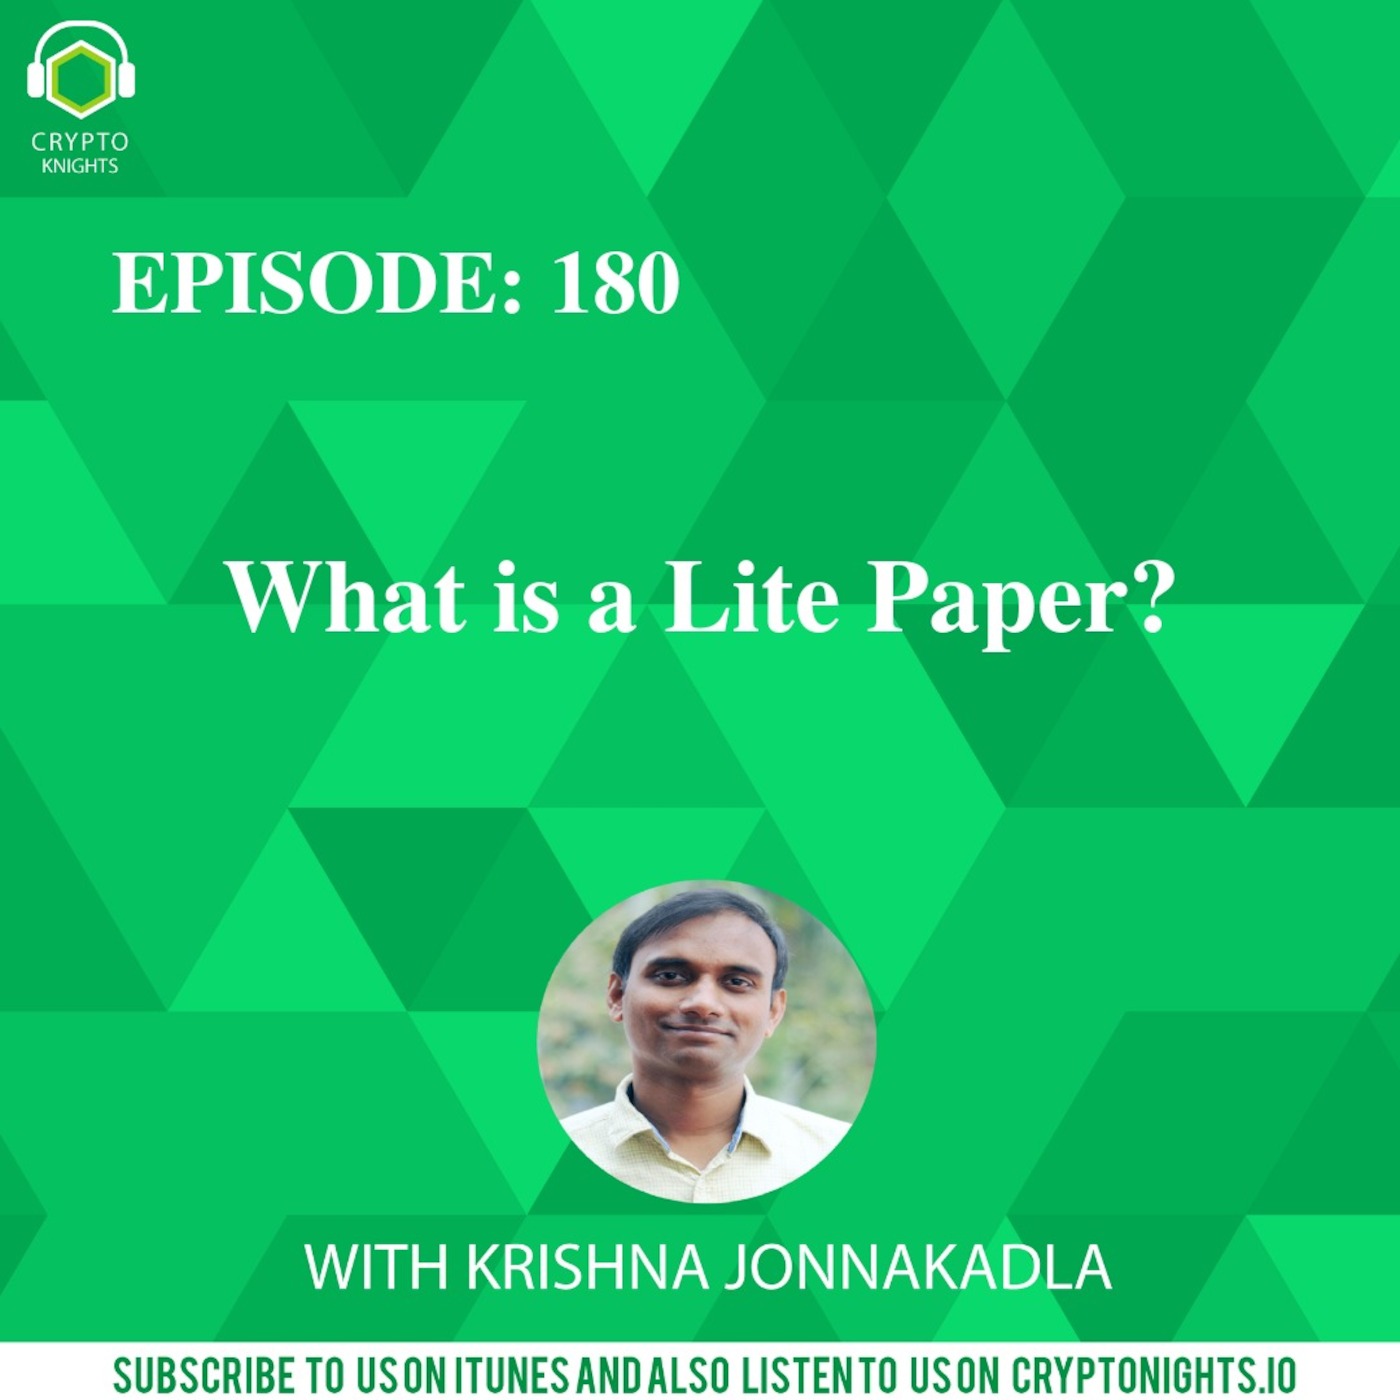 Episode 180 - What is a Lite Paper?